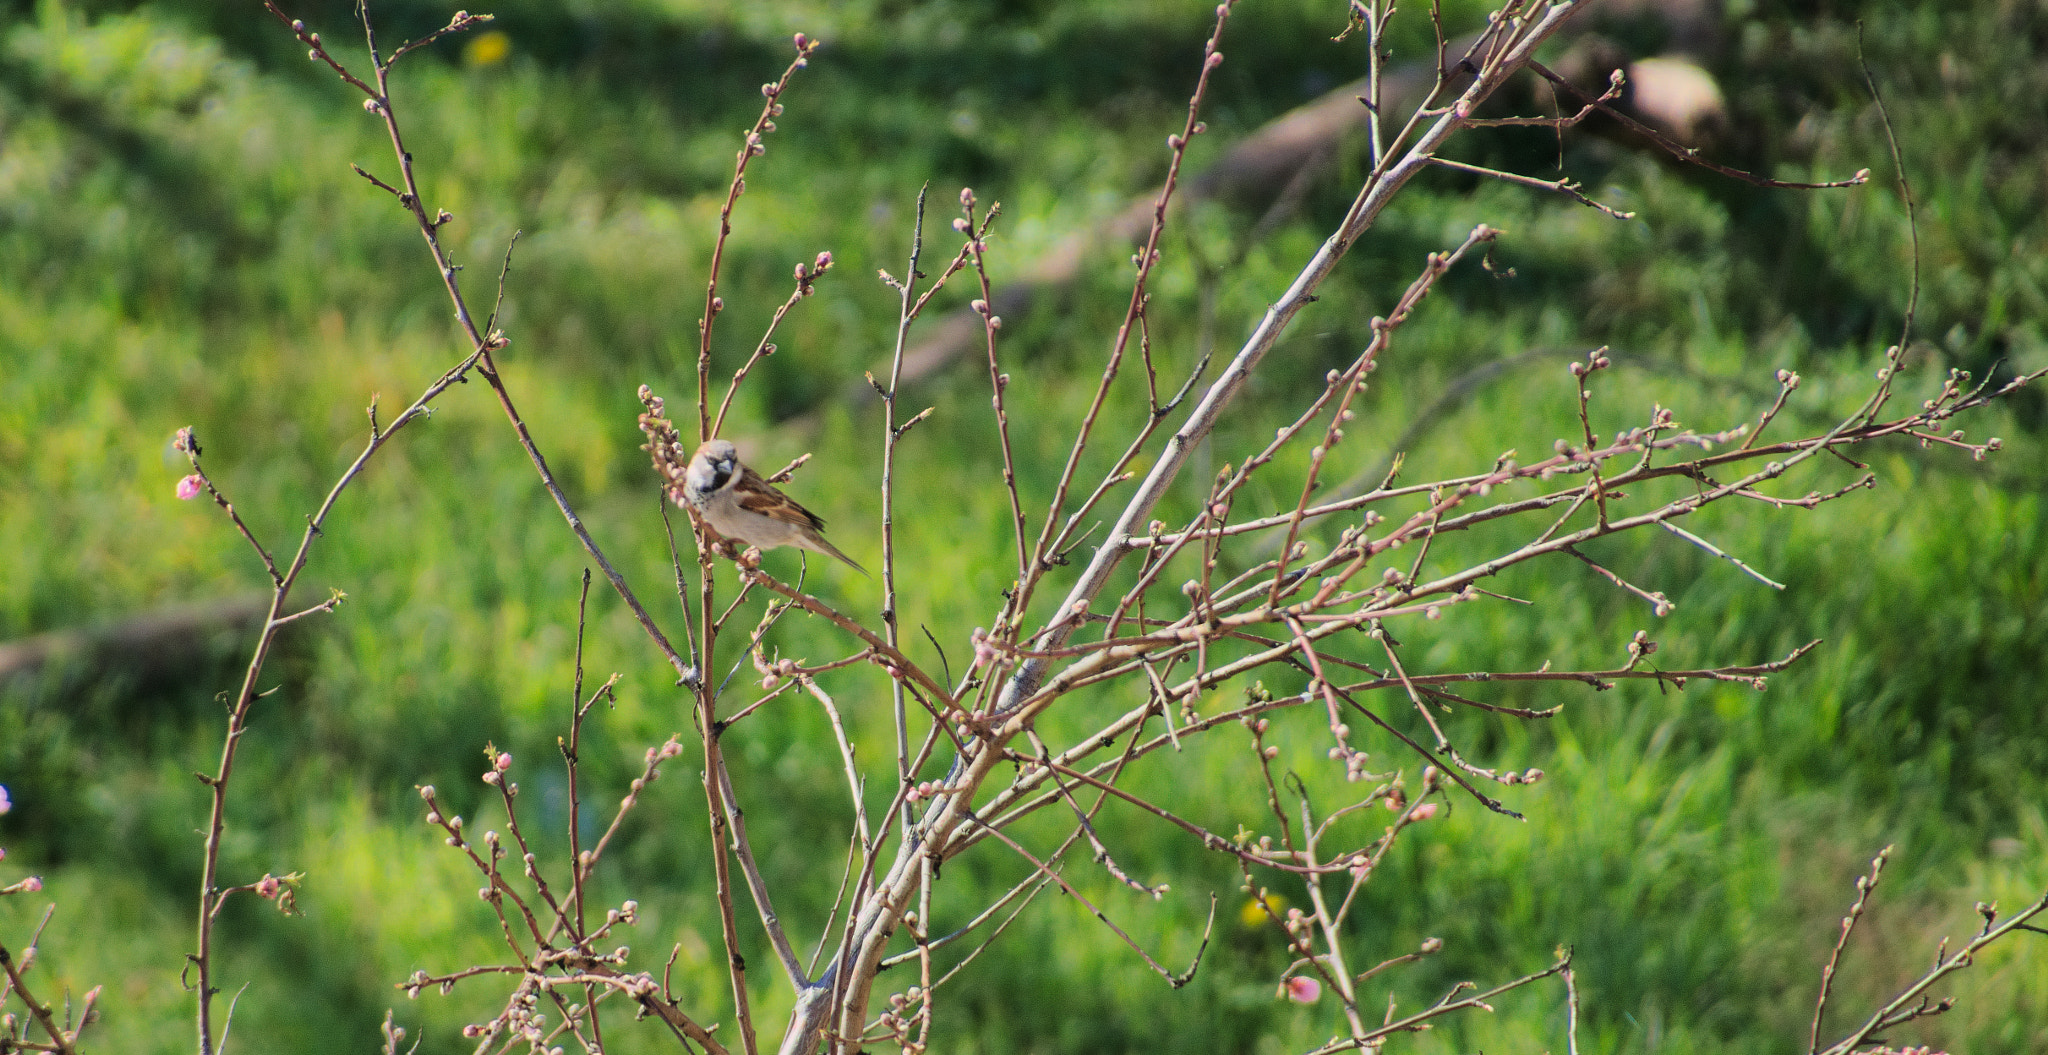 Nikon D3300 + Tamron 16-300mm F3.5-6.3 Di II VC PZD Macro sample photo. A sparrow from balcony photography